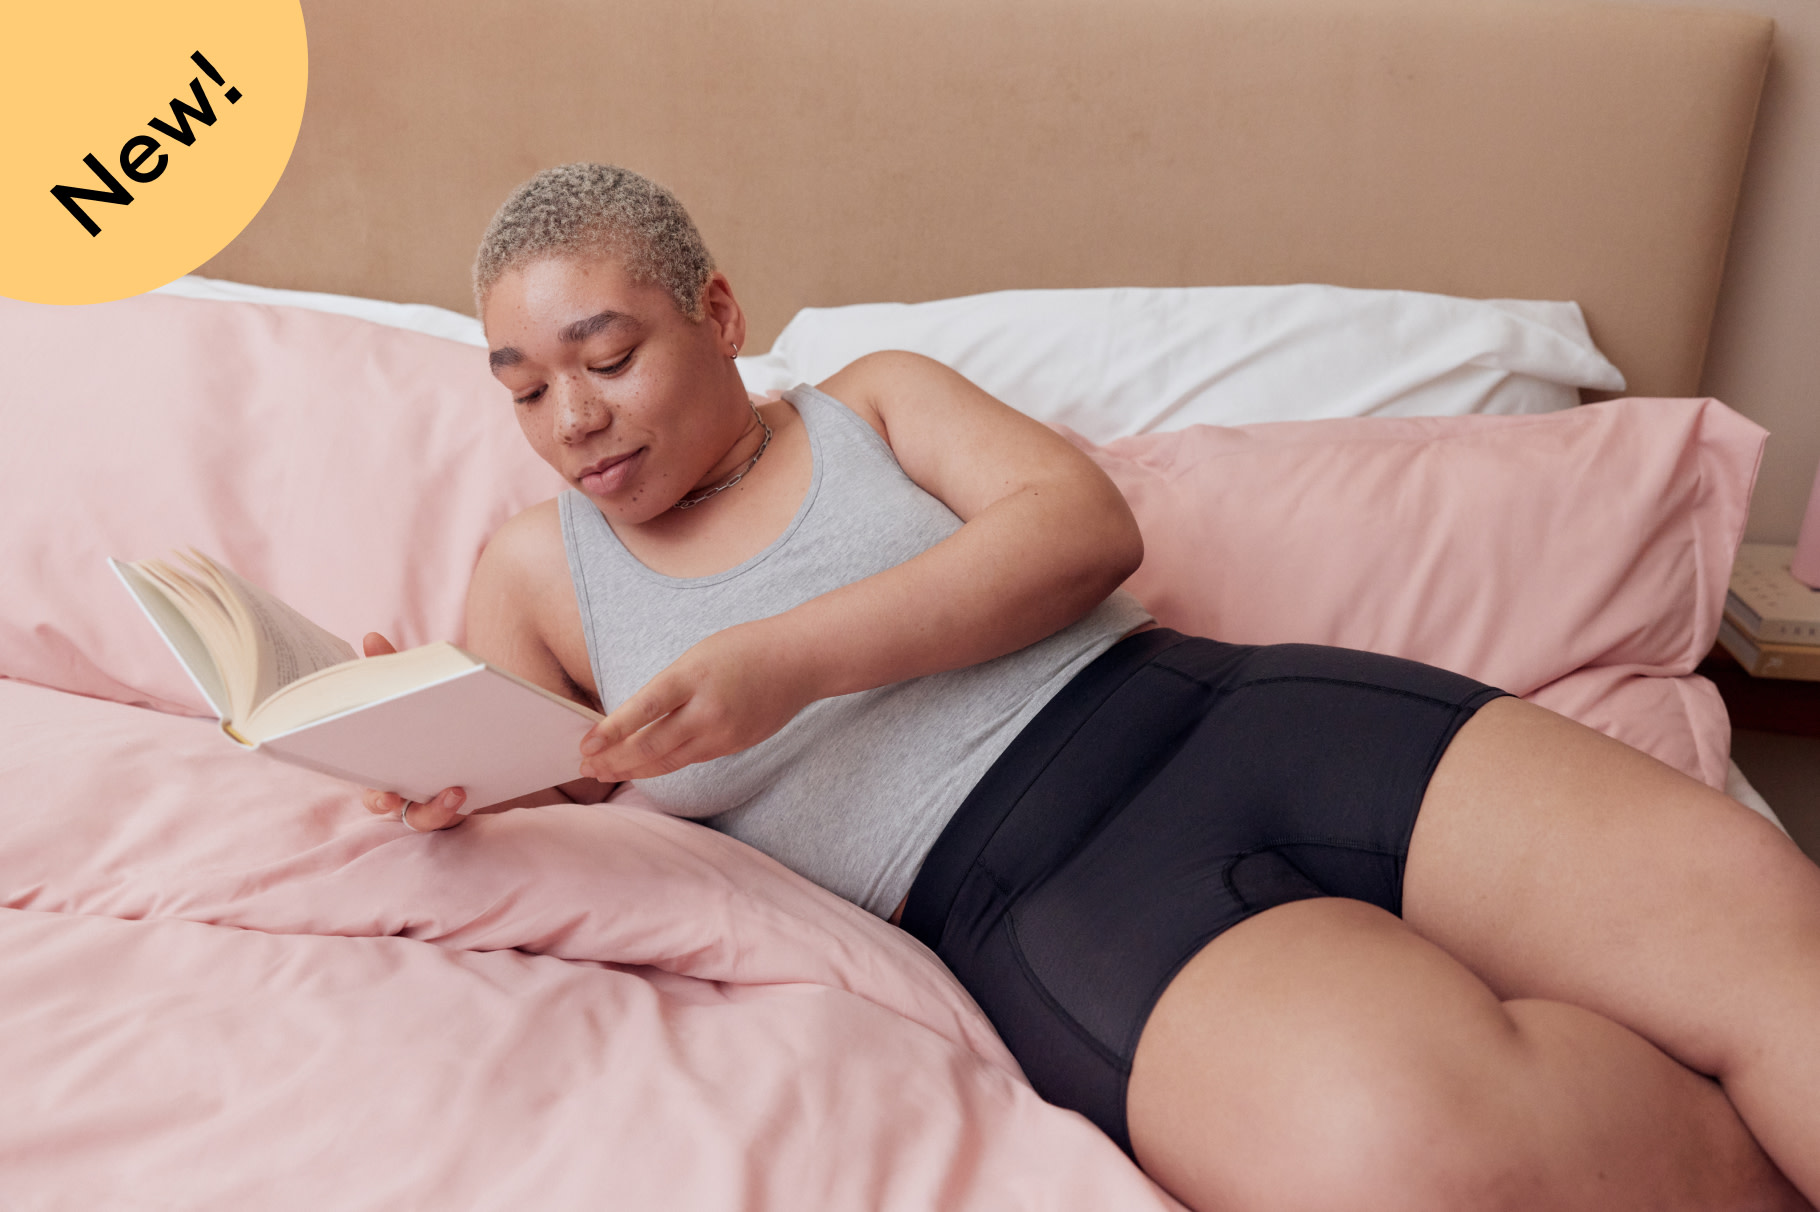 image with a badge on it saying new and showing a person laying in bed wearing thinx overnight boyshorts